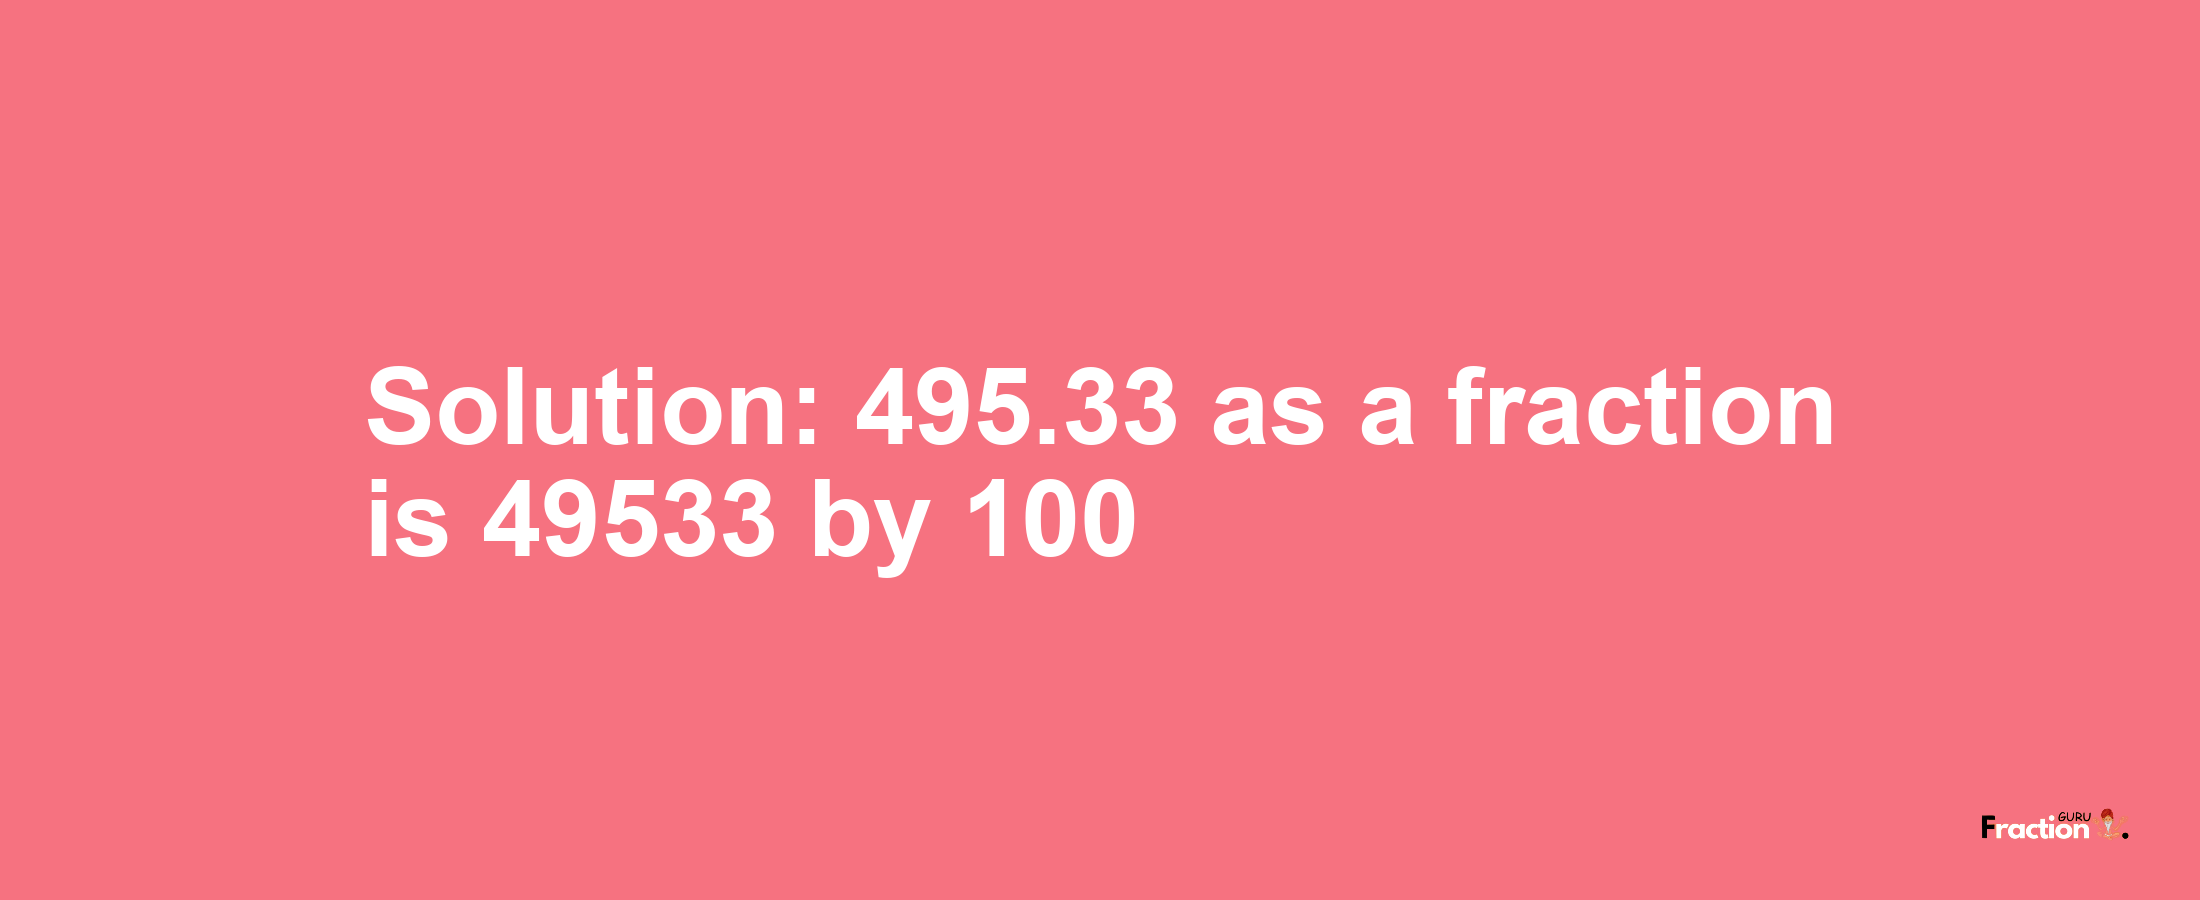 Solution:495.33 as a fraction is 49533/100